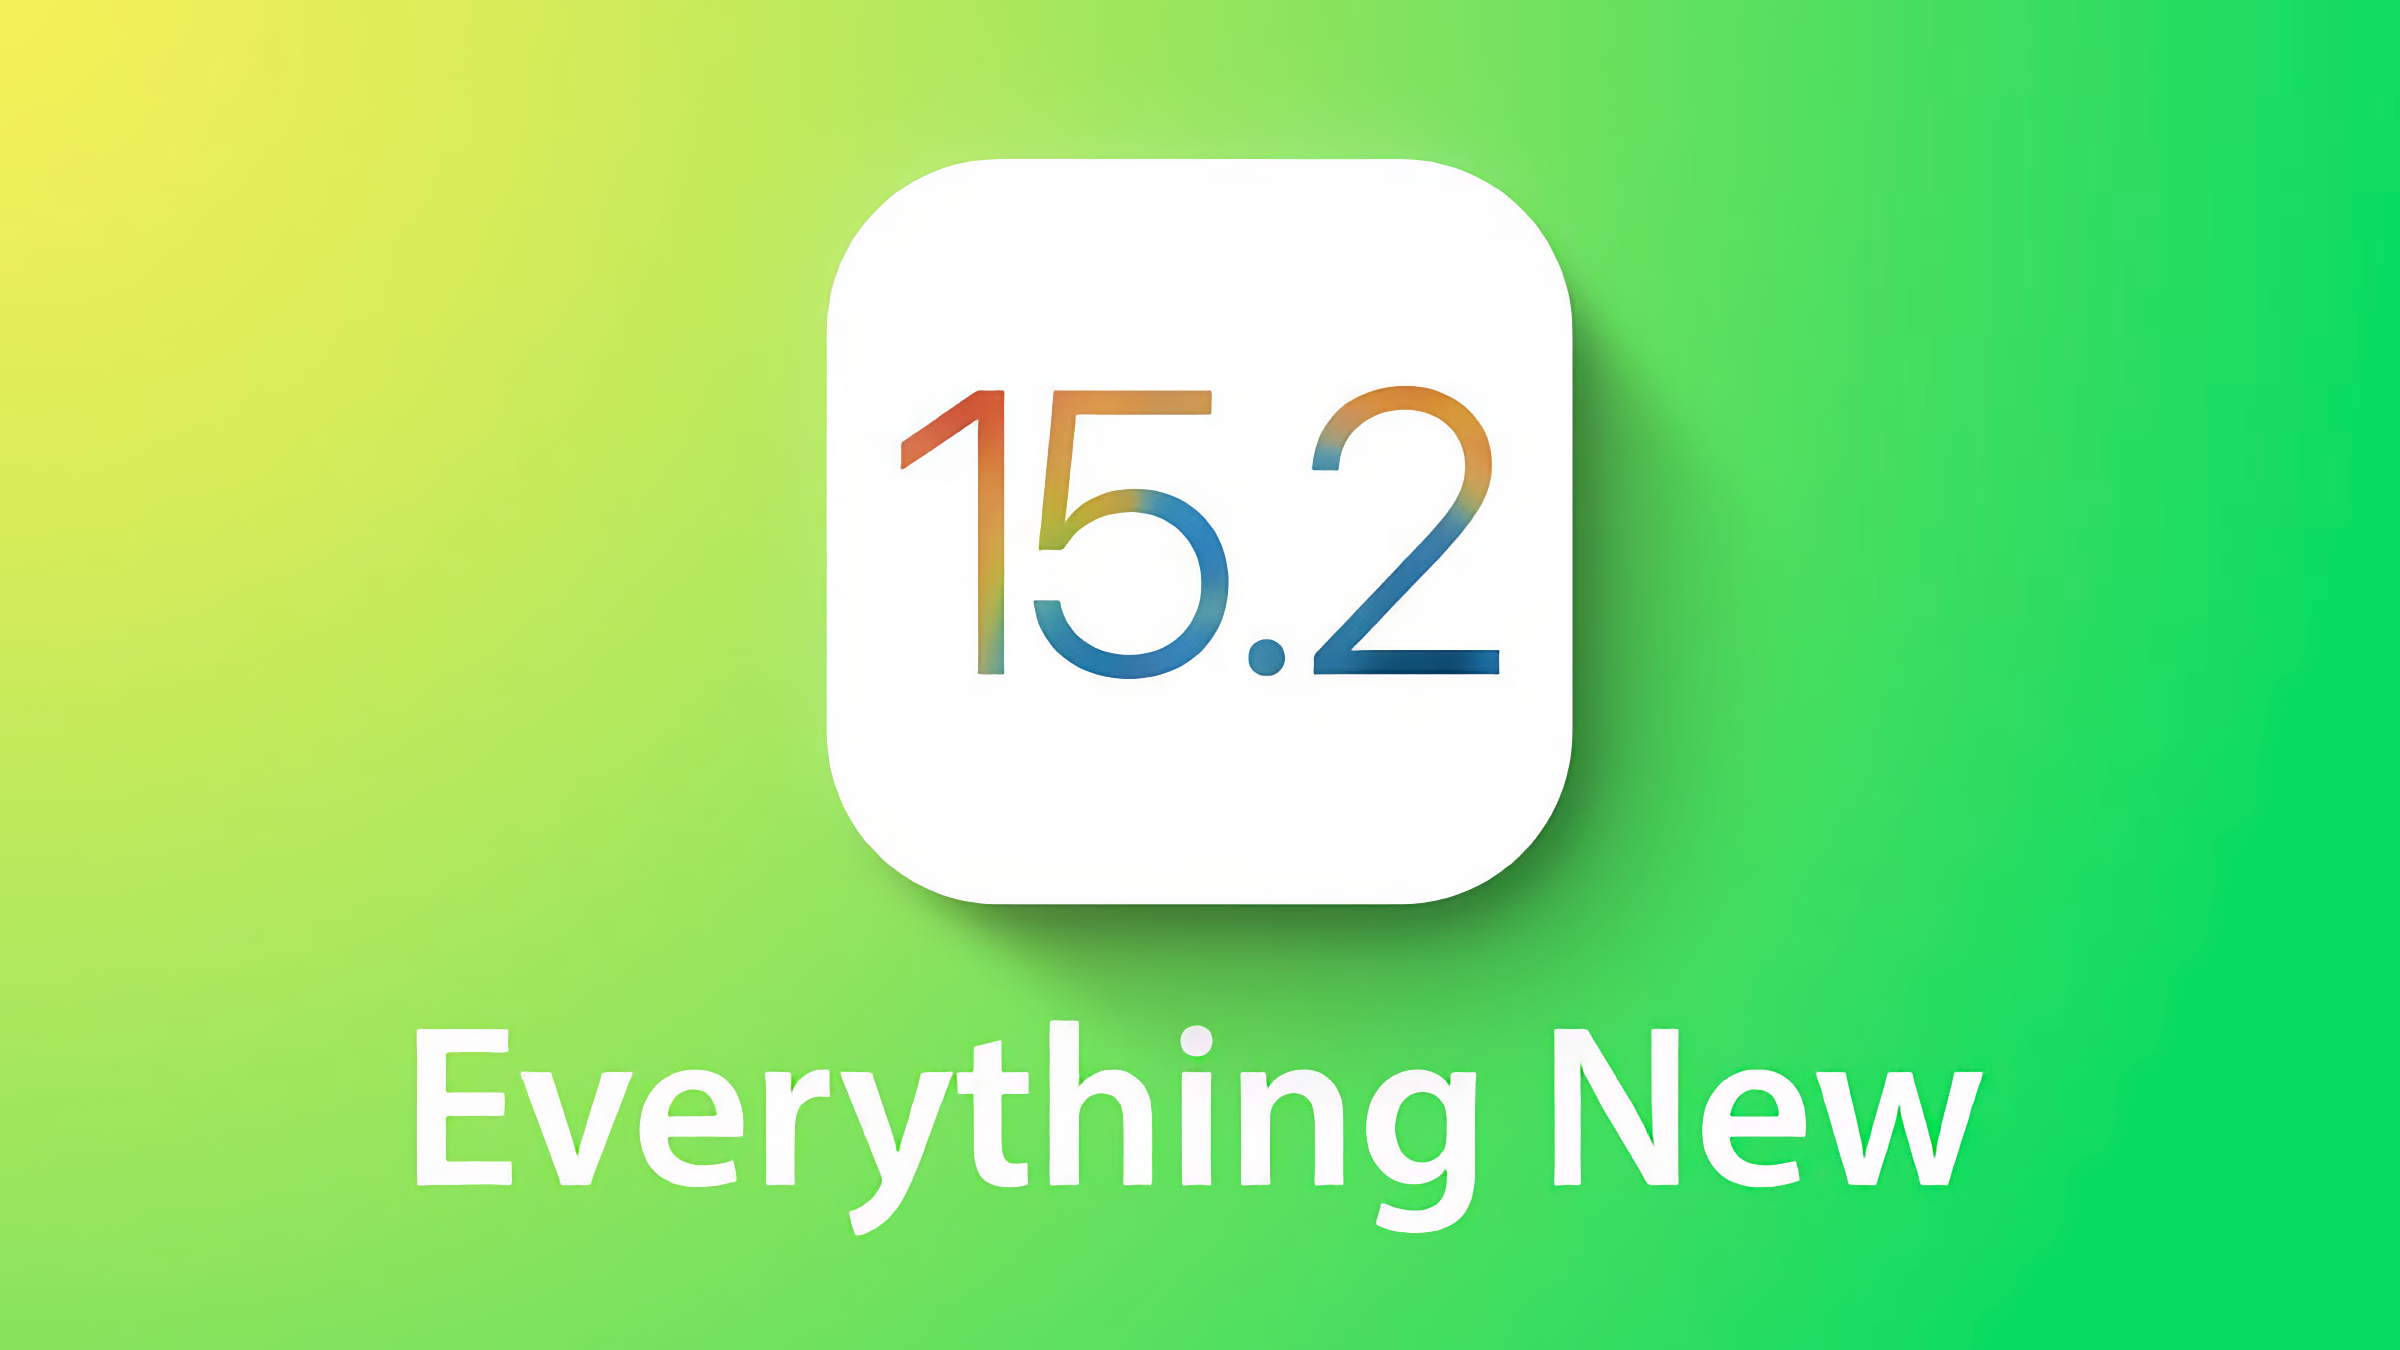 The stable version of iOS 15.2 has been released: we tell you what's new